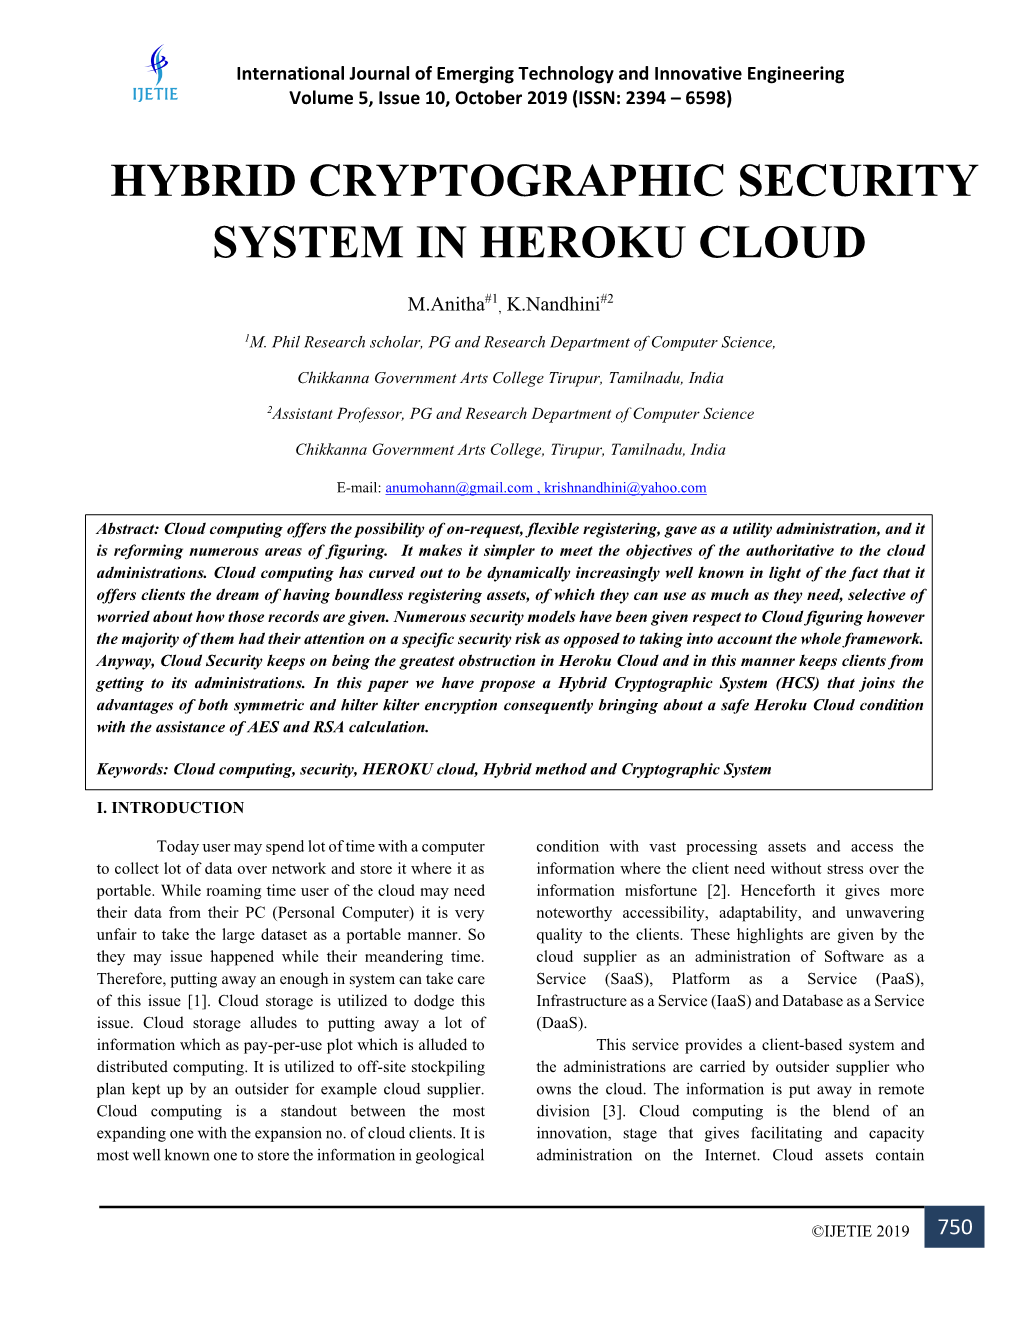 Hybrid Cryptographic Security System in Heroku Cloud